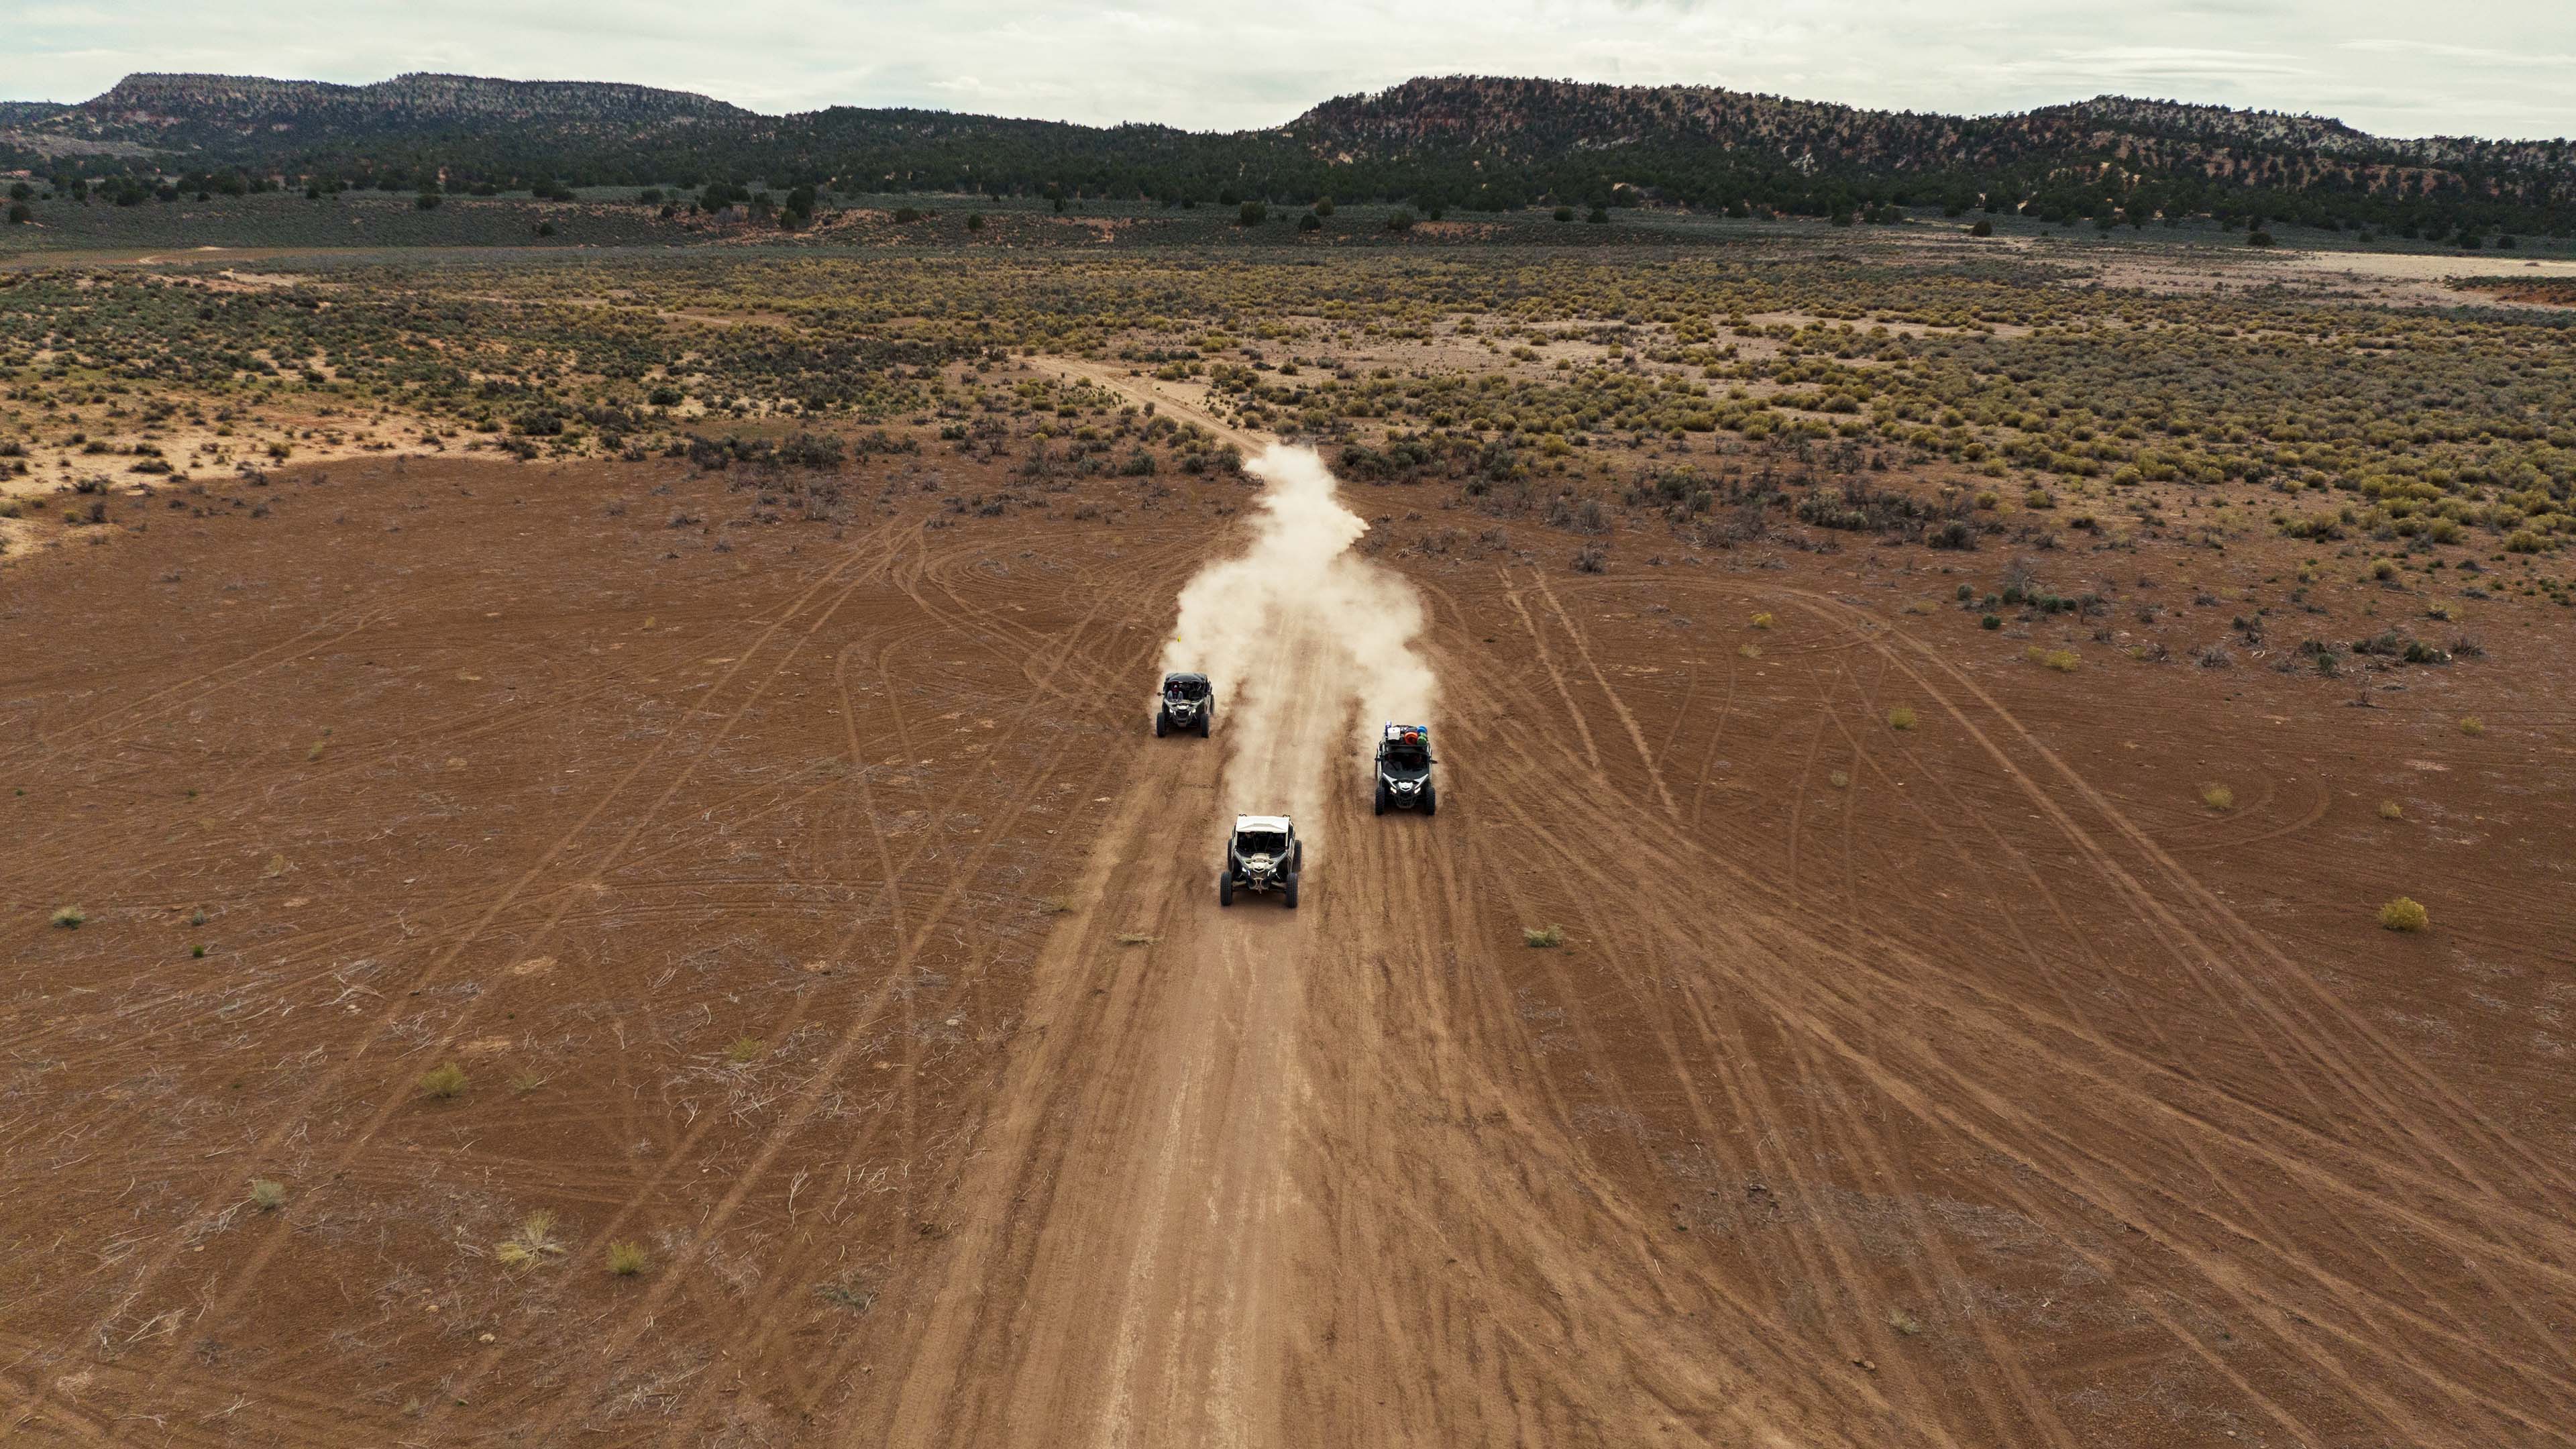 Three Can-Am Off-Road vehicles riding on a dirt road